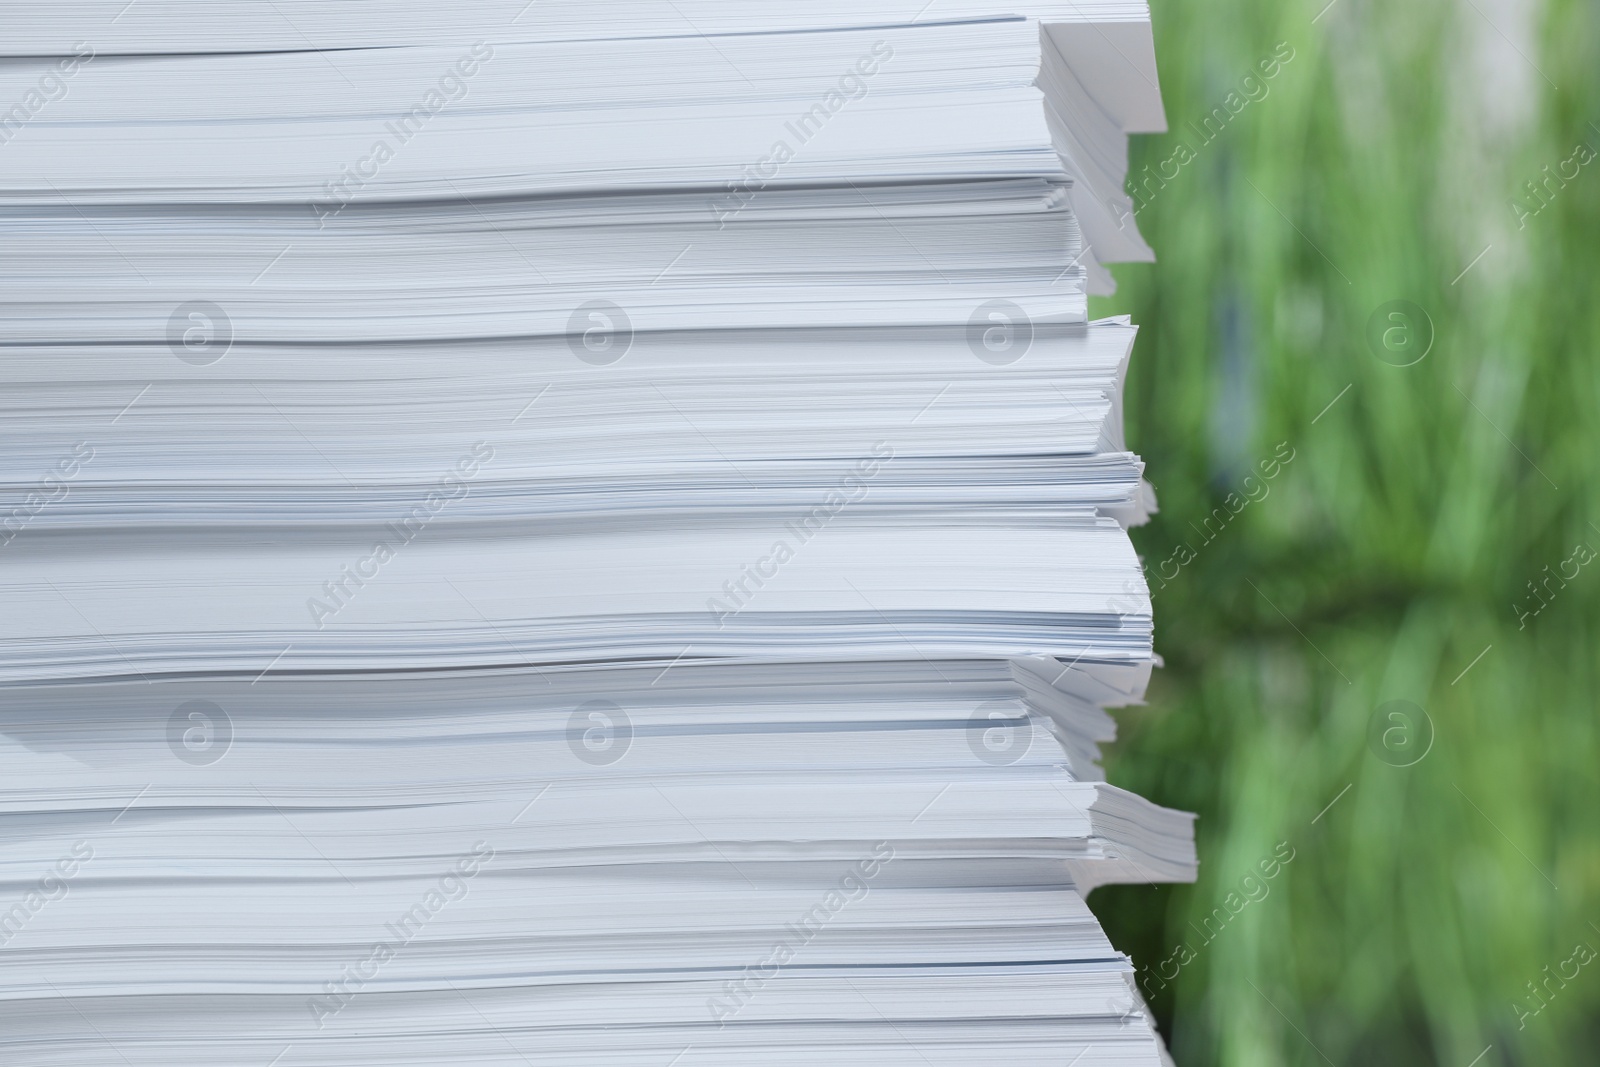 Photo of Stack of paper sheets against blurred background, closeup. Space for text